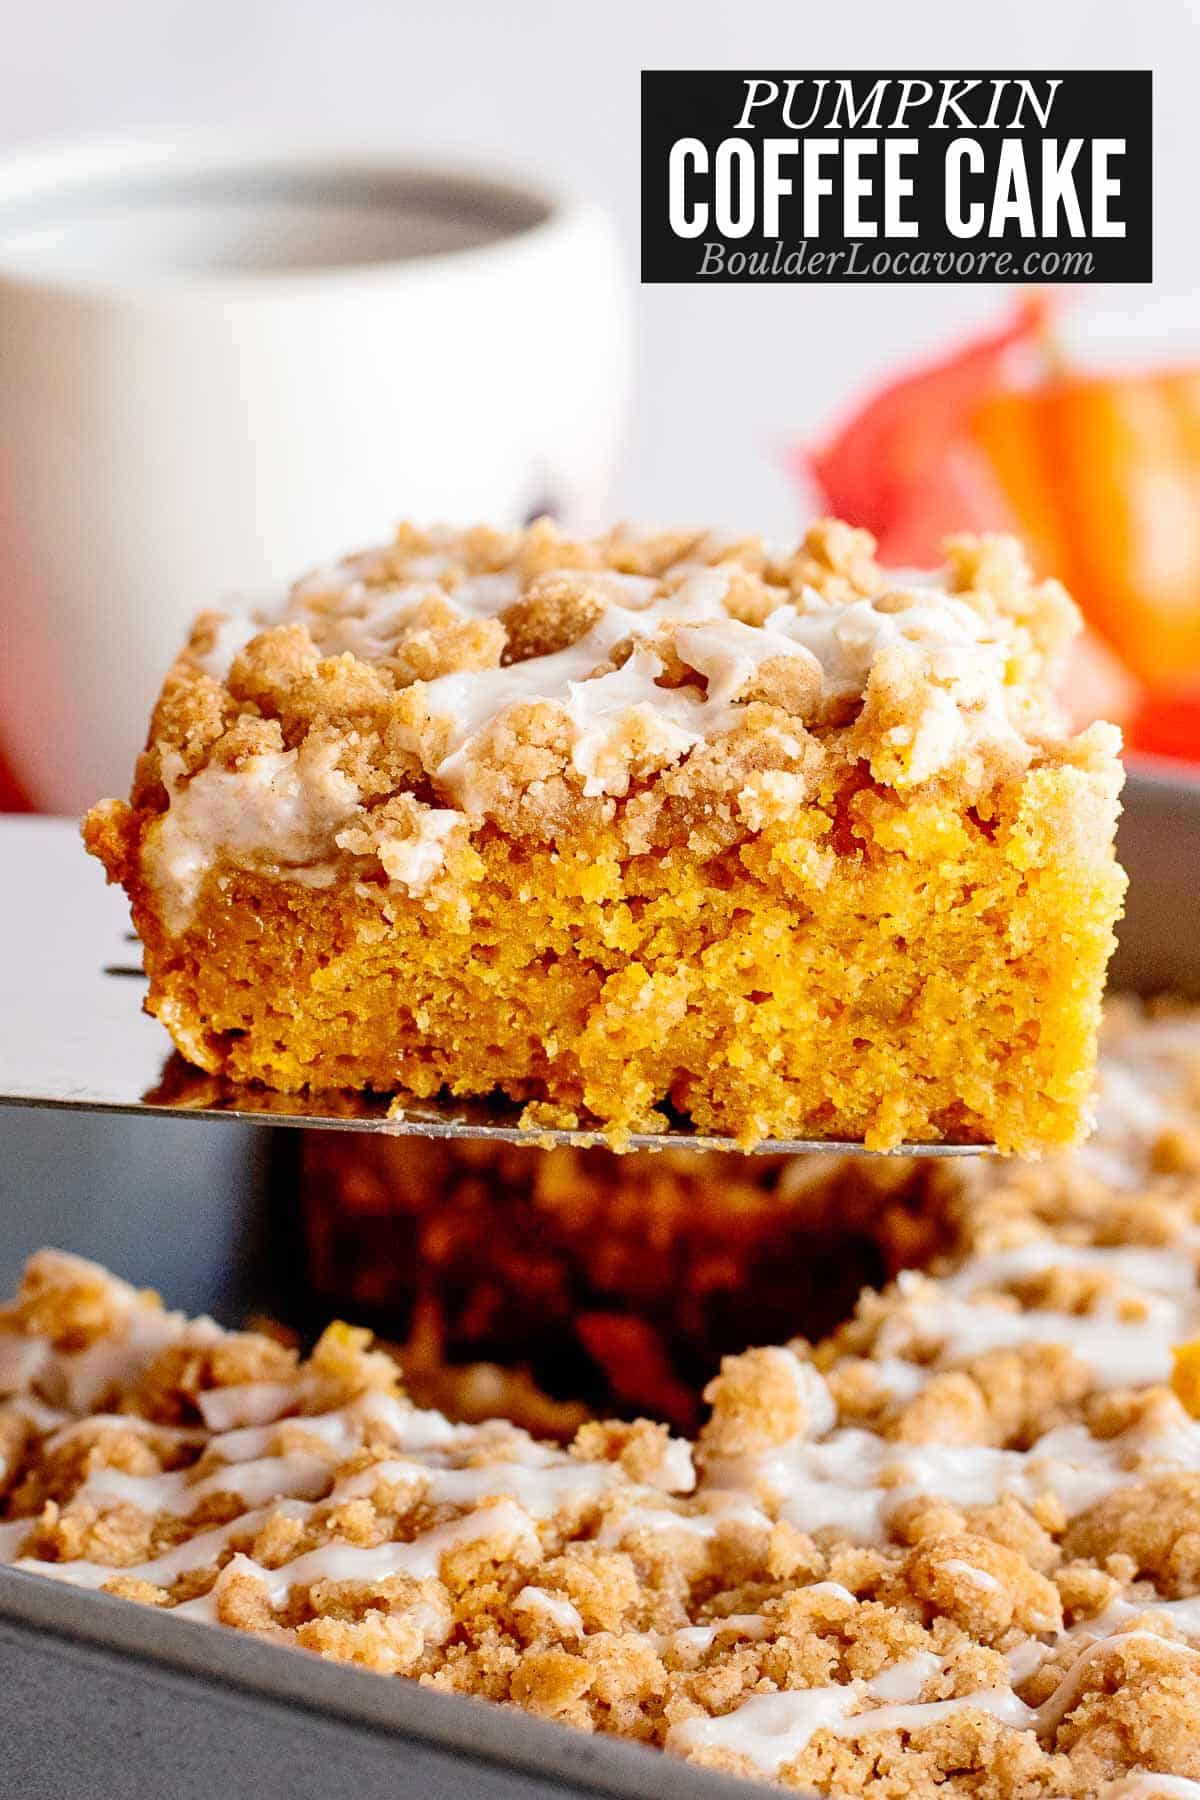 slice of pumpkin coffee cake with text.